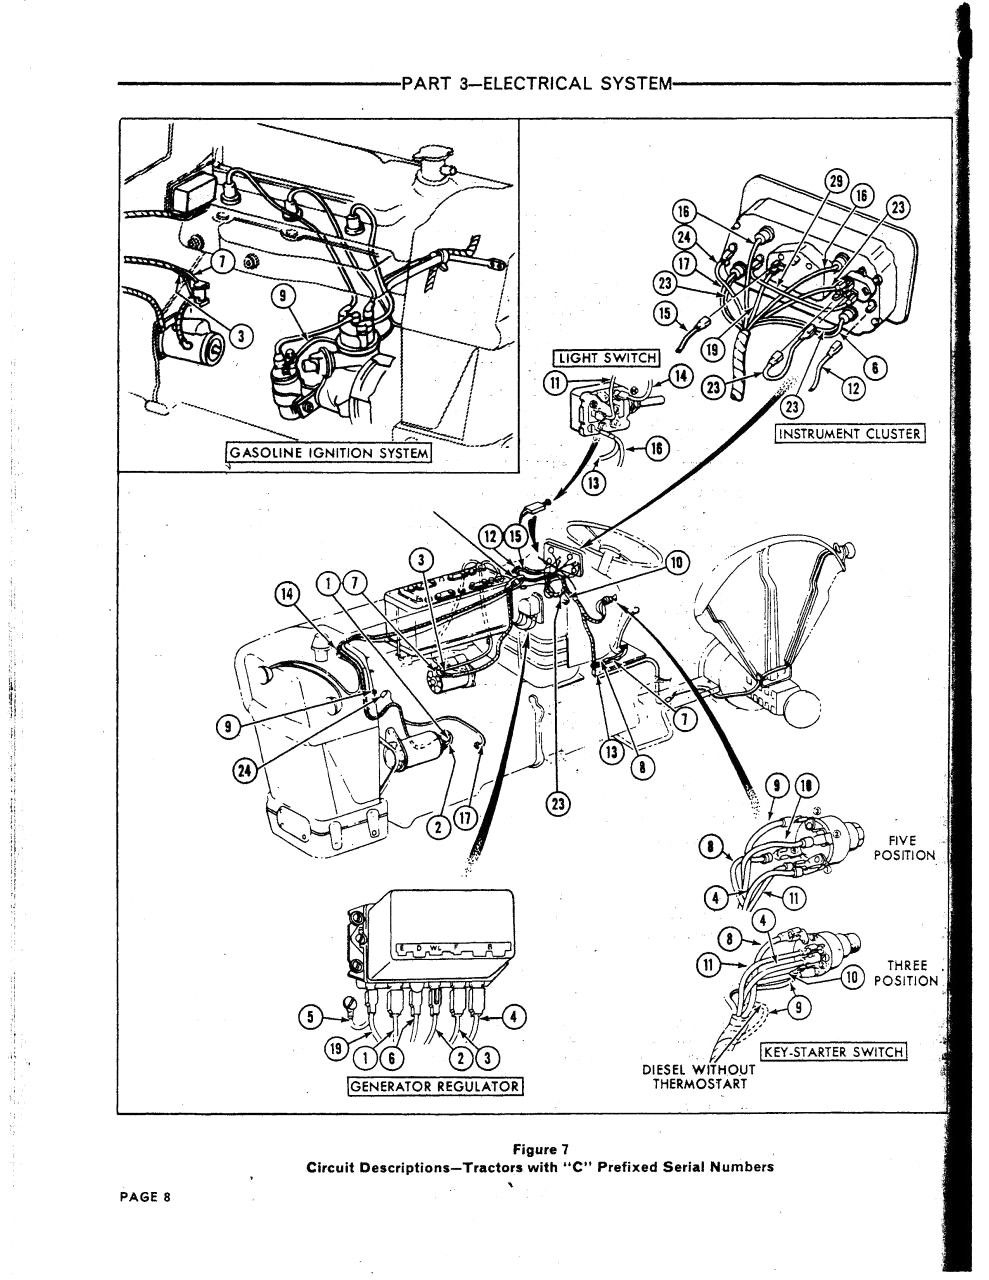 Pictures Wiring Diagram For Ford 3000 Tractor Entrancing | Wiring - Starter Wiring Diagram Ford